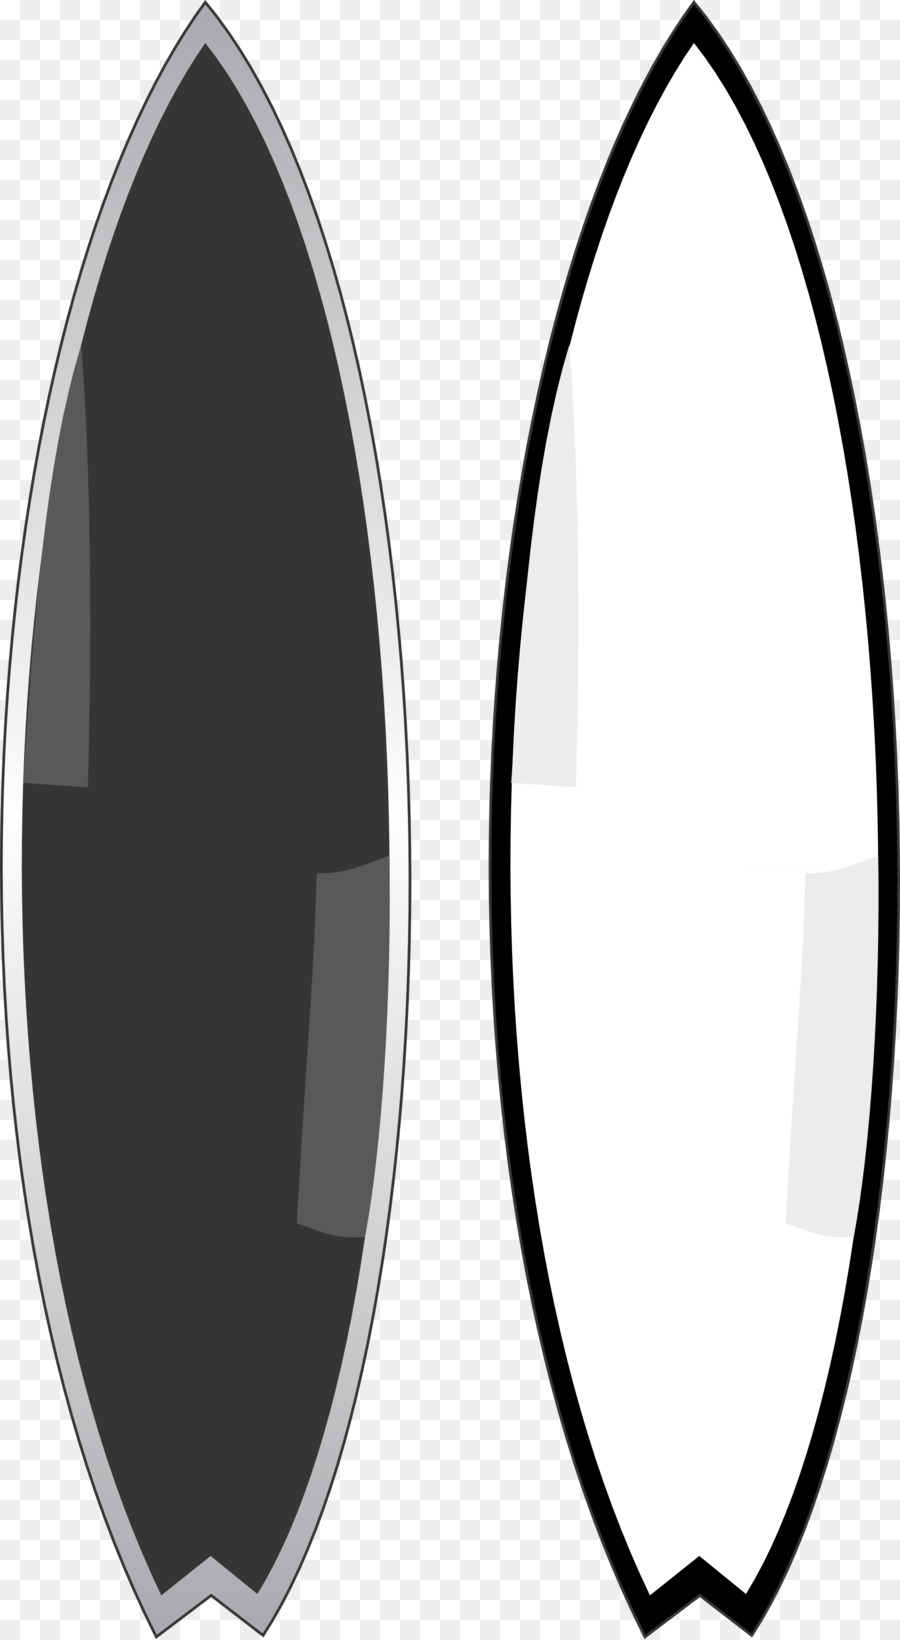 Collection of Surfboard clipart | Free download best Surfboard clipart